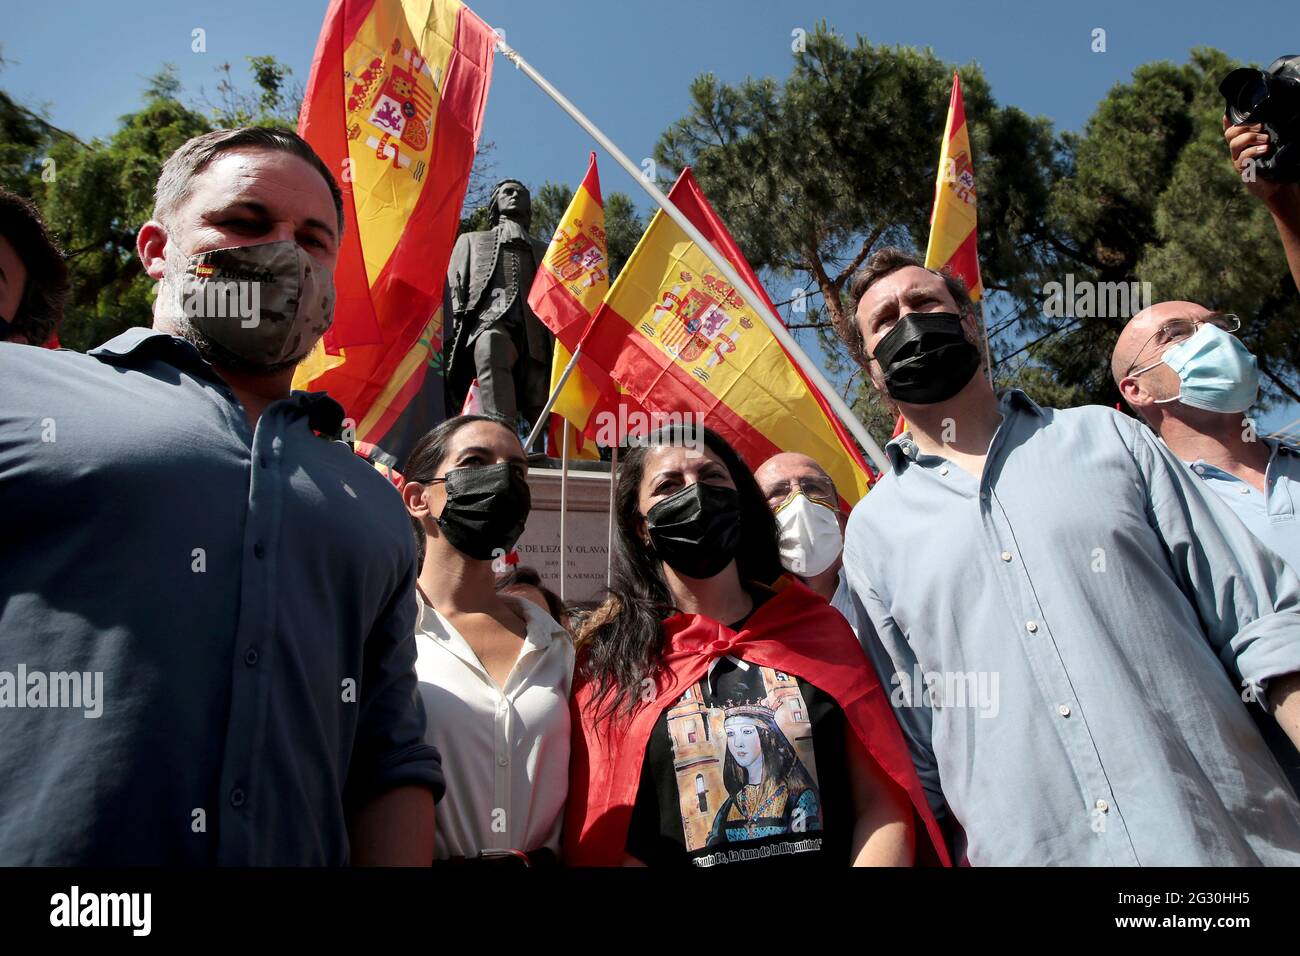 Madrid, Spain; 13.06.2021.- Santiago Abascal (L) leader of Vox the politician with the greatest presence in the demonstration in the Plaza de Colon, at the monument to the Spanish admiral Blas de Lezo, who was one-eyed, lame and one-eyed. 'Unión 78' platform led by the Spanish politician Rosa Díez, the group that convened the meeting of the far-right in the Plaza de Colón in Madrid, to protest the possible pardons to the imprisoned Catalan independence politicians. Among thousands of people who filled the square and the adjacent streets with Spanish flags, the attendees shouted slogans such as Stock Photo